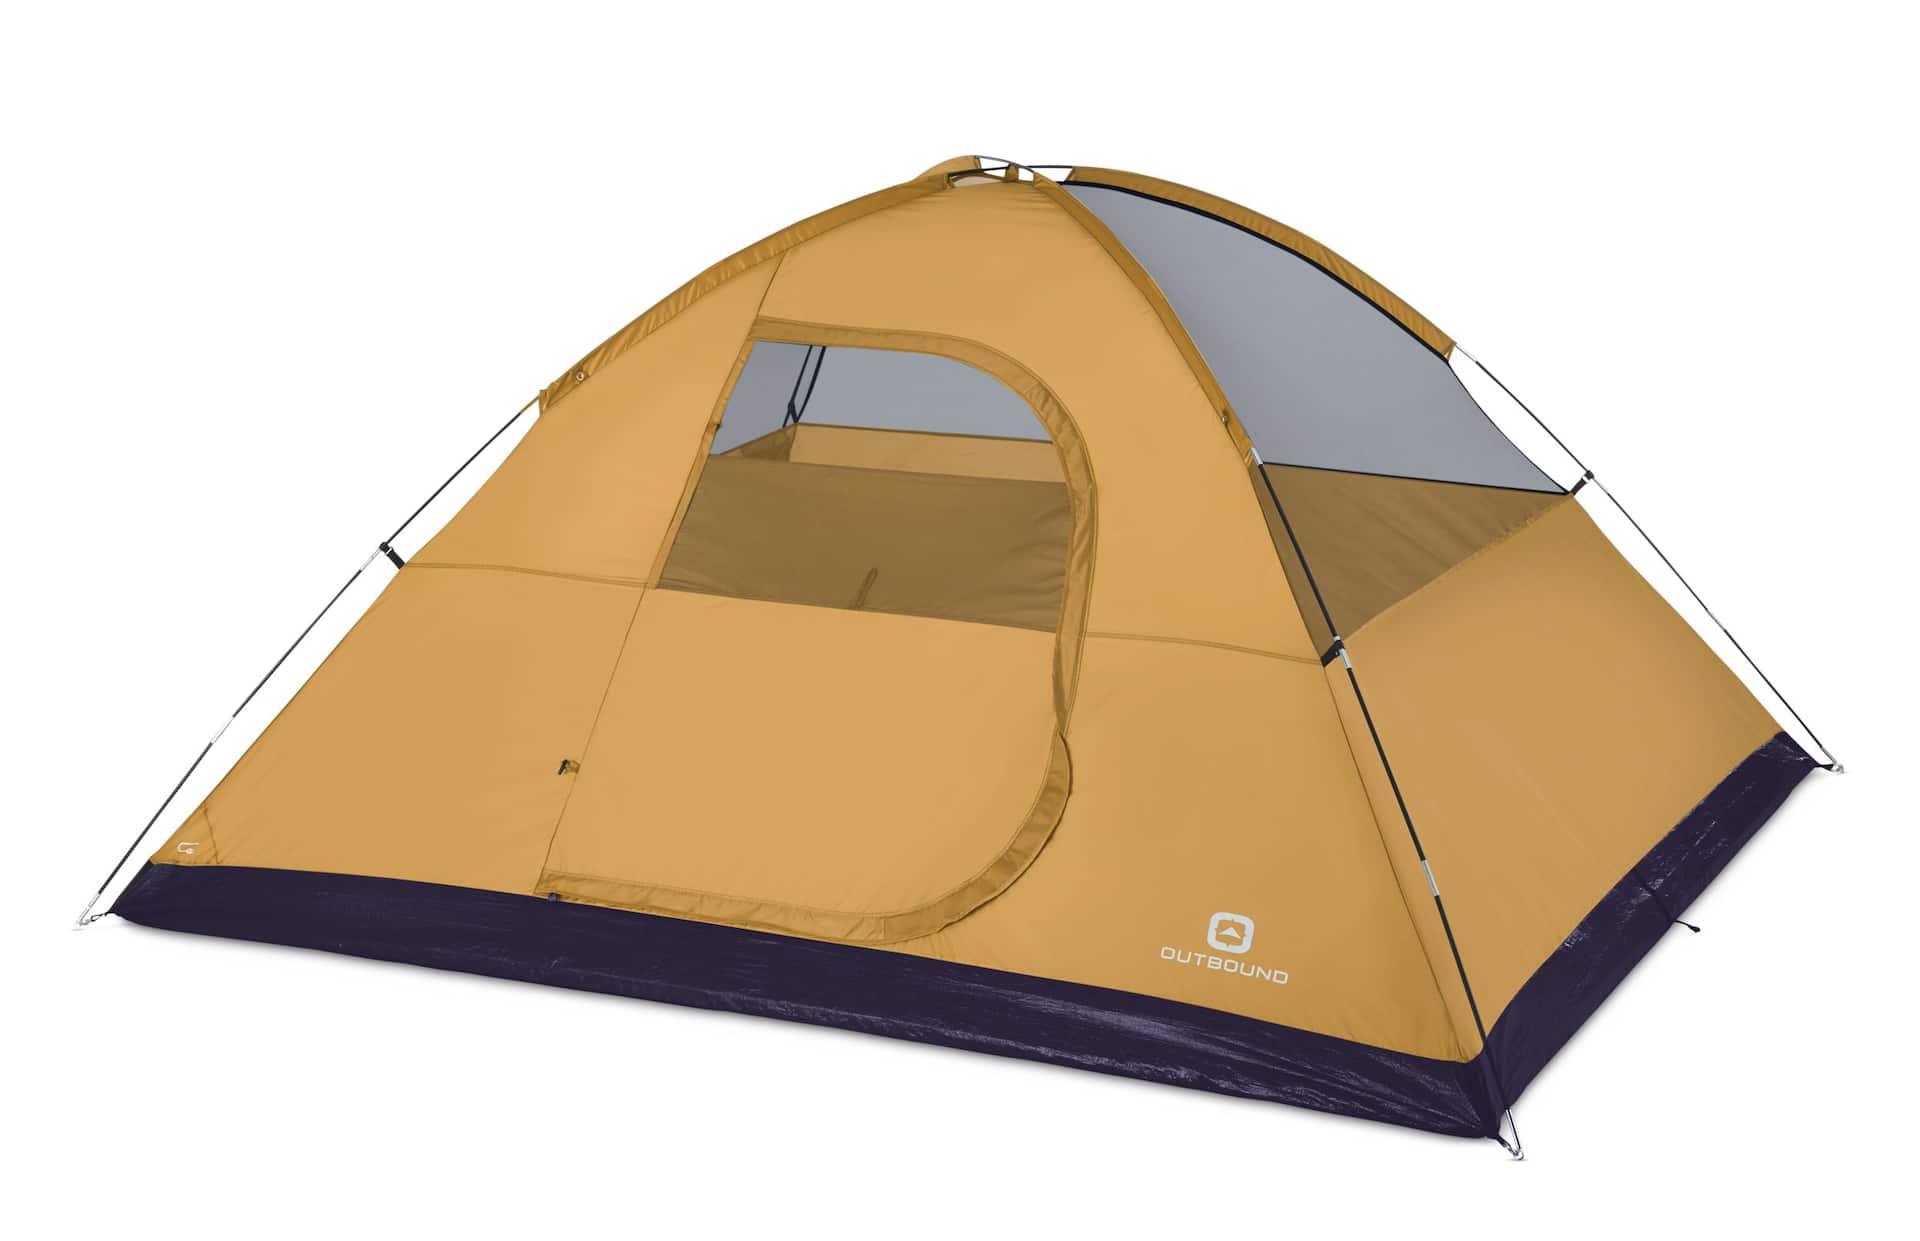 Outbound 3-Season, 6-Person Easy Set-Up Camping Dome Tent w/ Rain